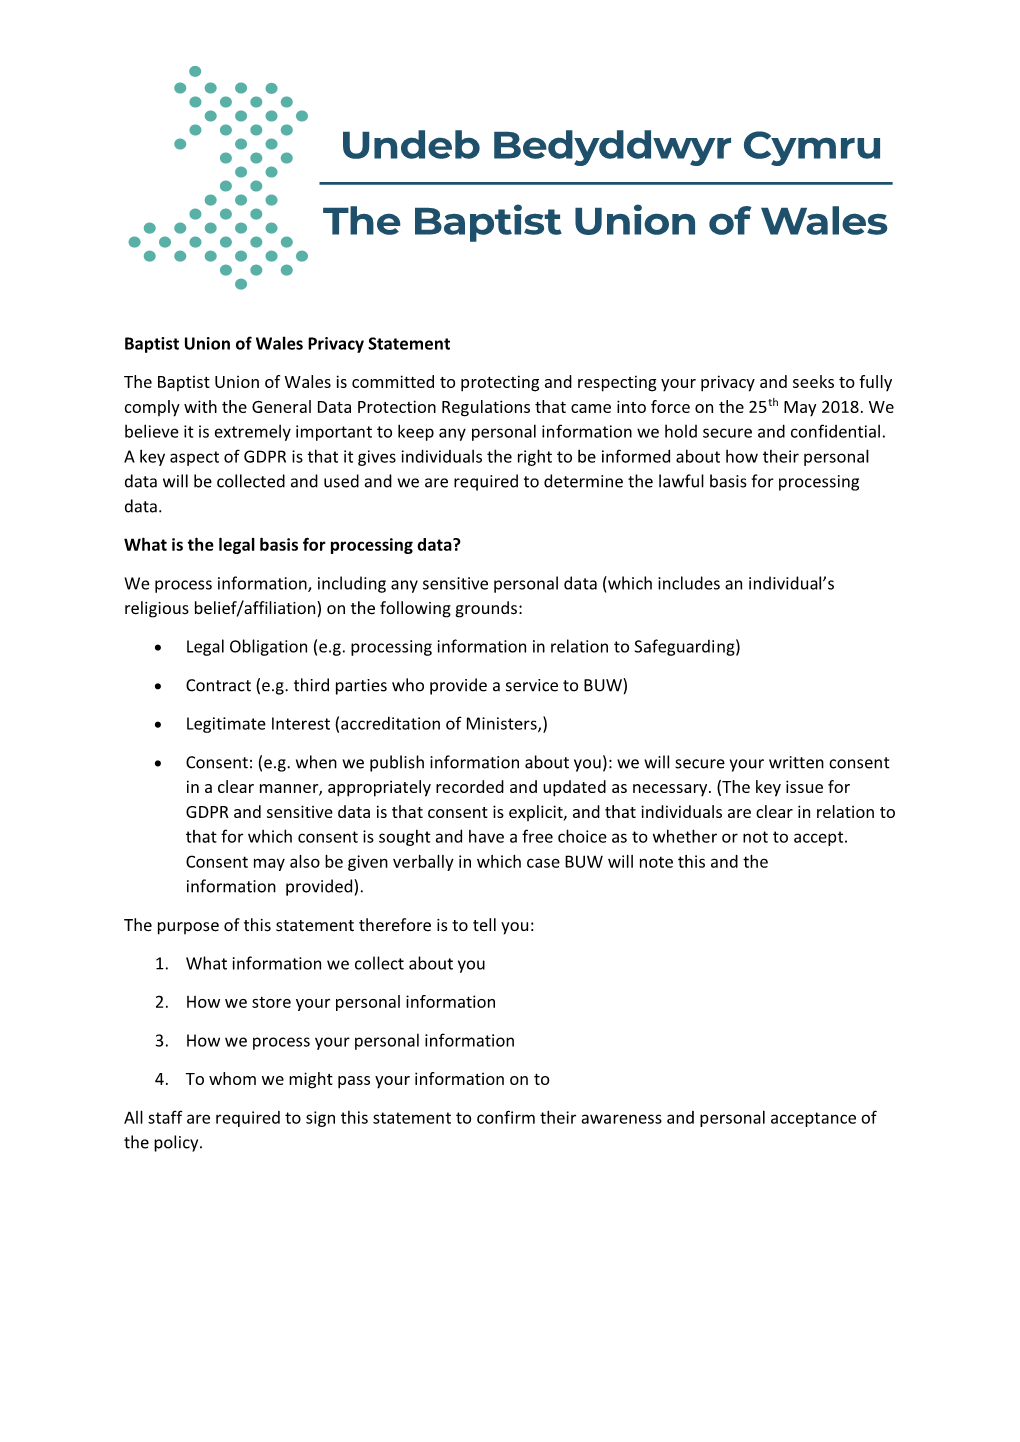 Baptist Union of Wales Privacy Statement the Baptist Union Of